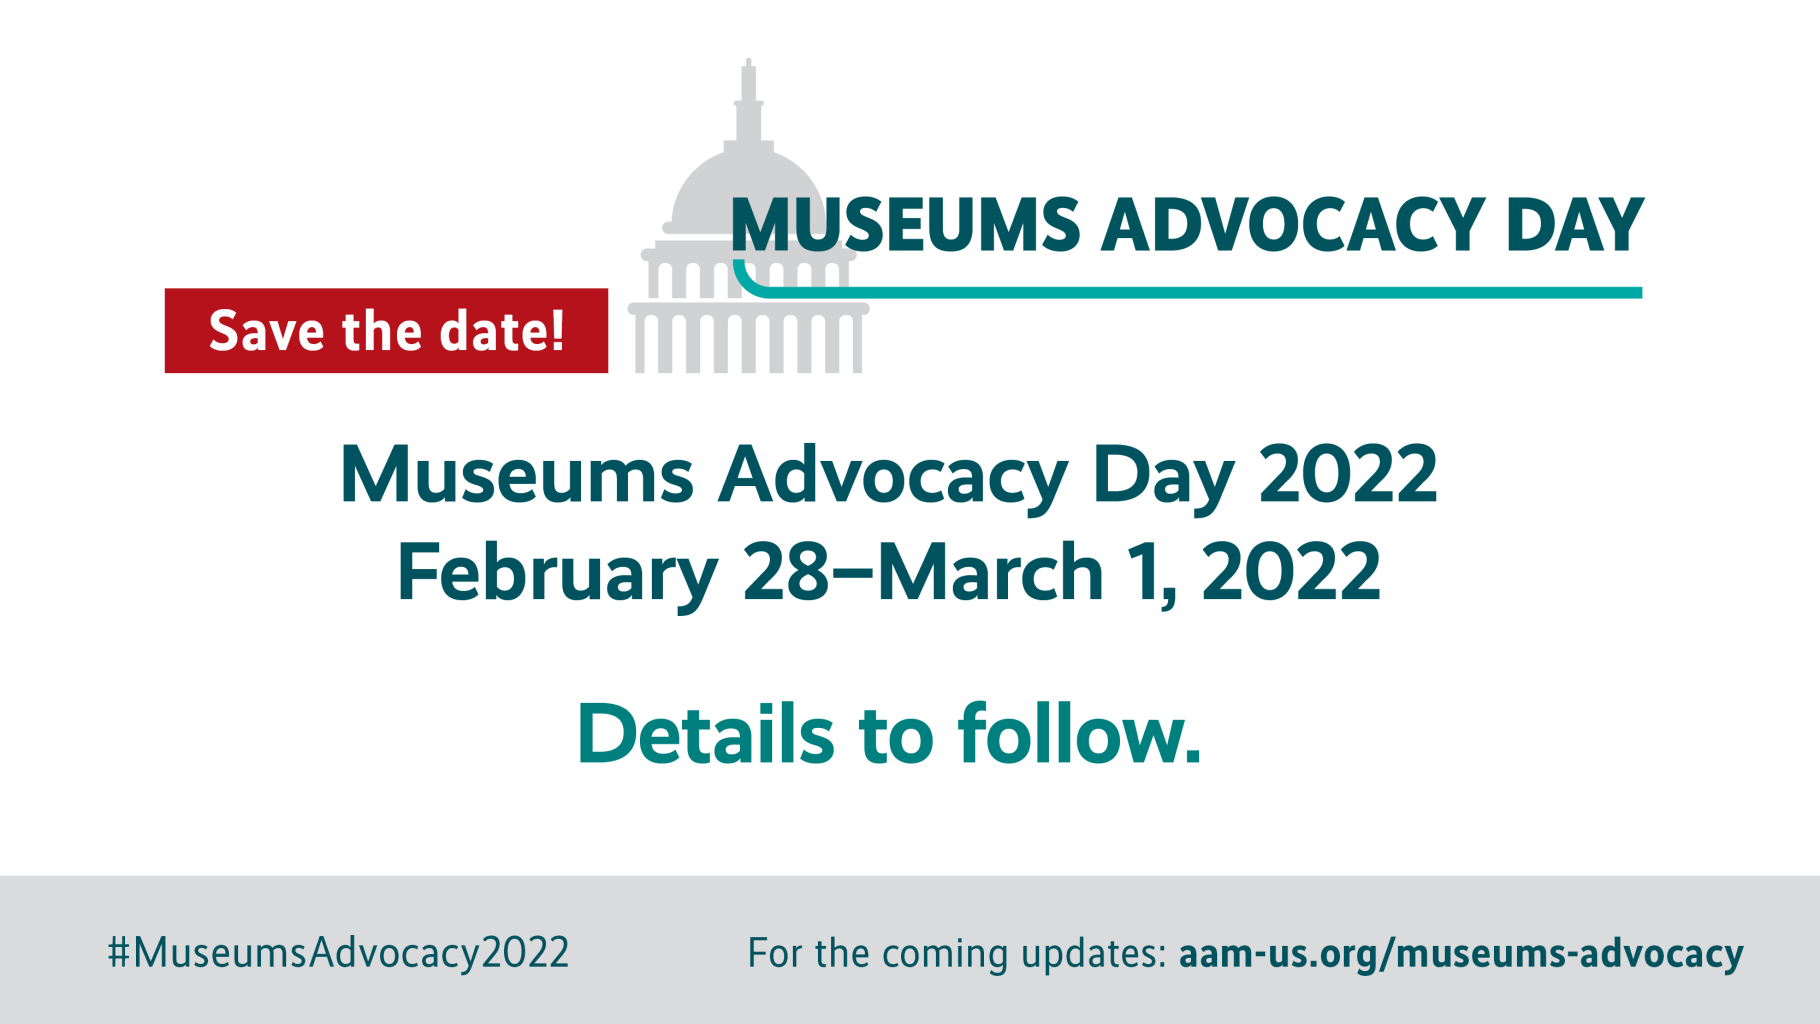 Museums Advocacy Day 2022 Save the Date - Feb. 28 - March 1, details to follow.